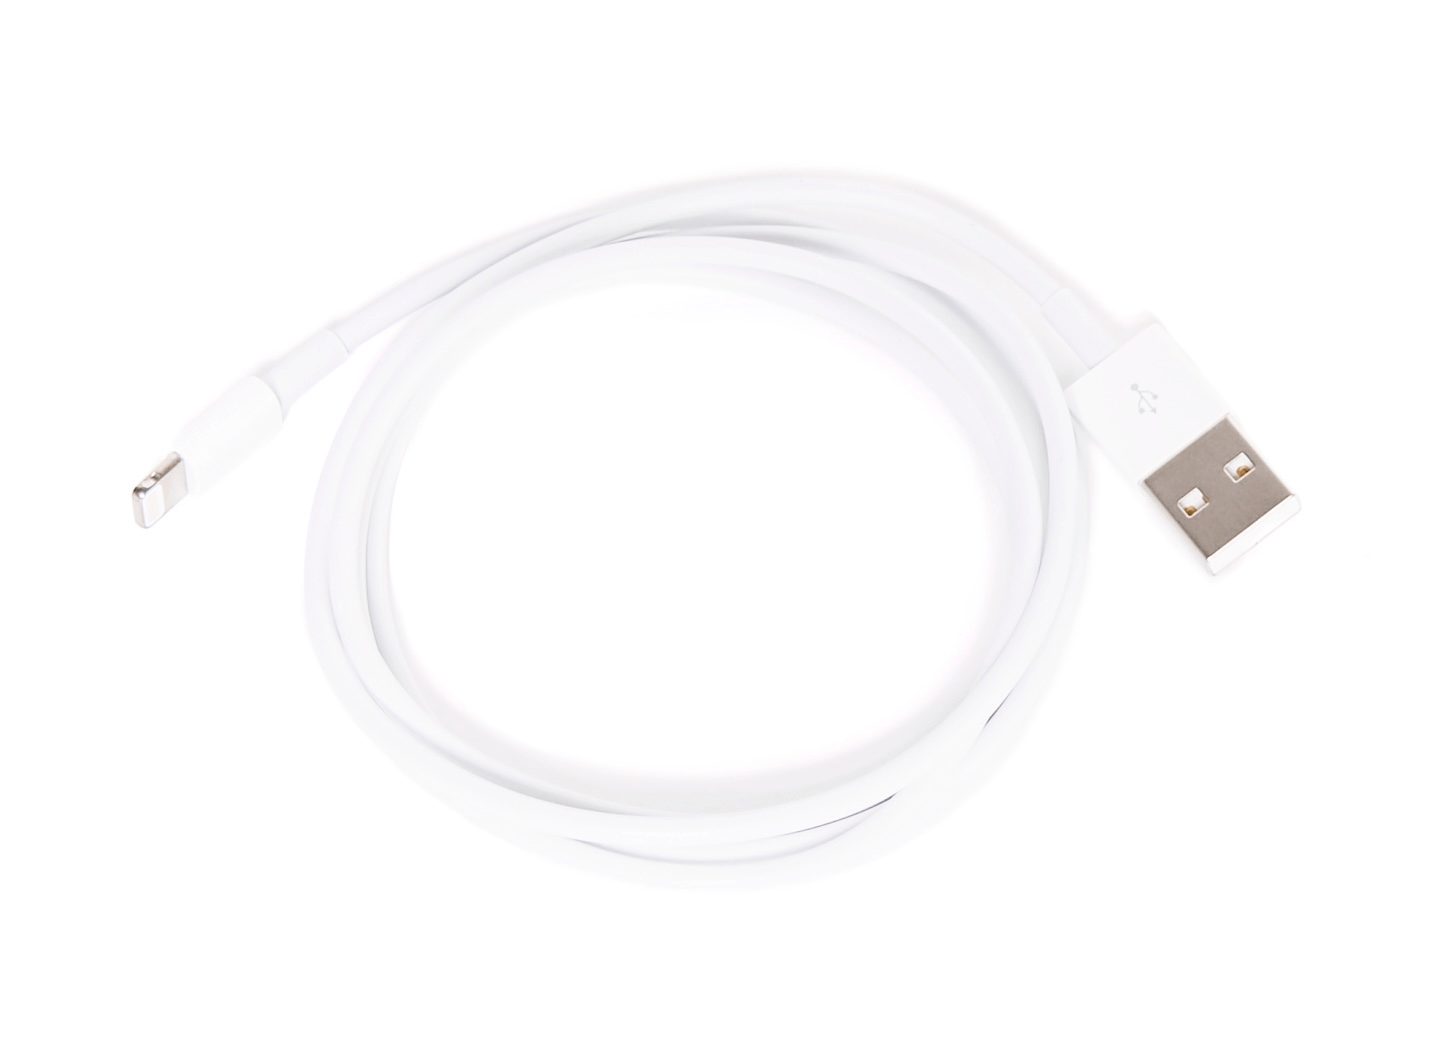 Lightning cable.